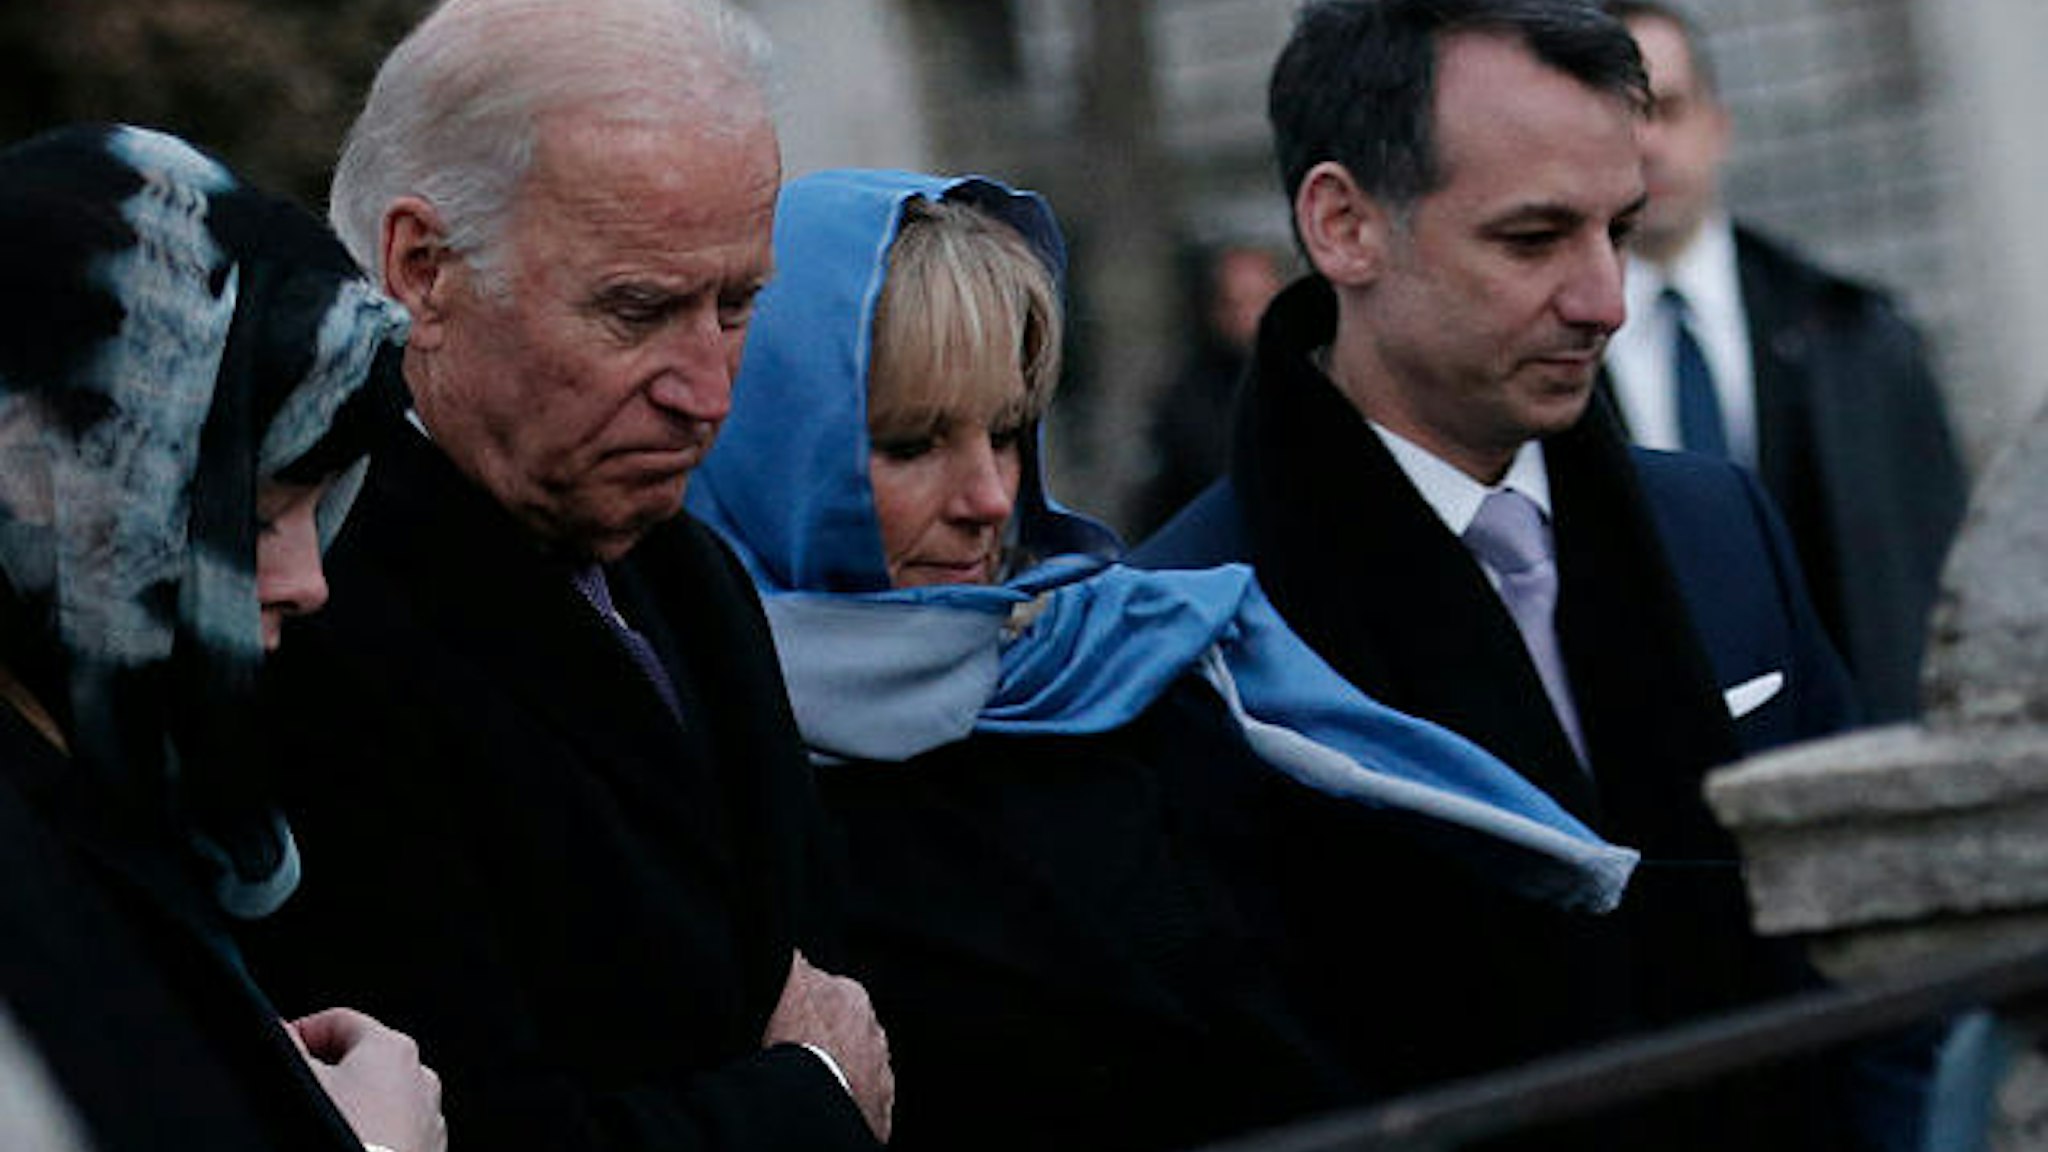 US Vice President Joe Biden (2nd L) flanked by his wife Jill (2nd R), his granddaughter Naomi Biden (L), and son-in-law Howard Krein (R) pays tribute on January 22, 2016 in Istanbul, to the victims of the January 12 bomb attack, where ten German tourists were killed, in the historic Sultanahmet district of Istanbul.